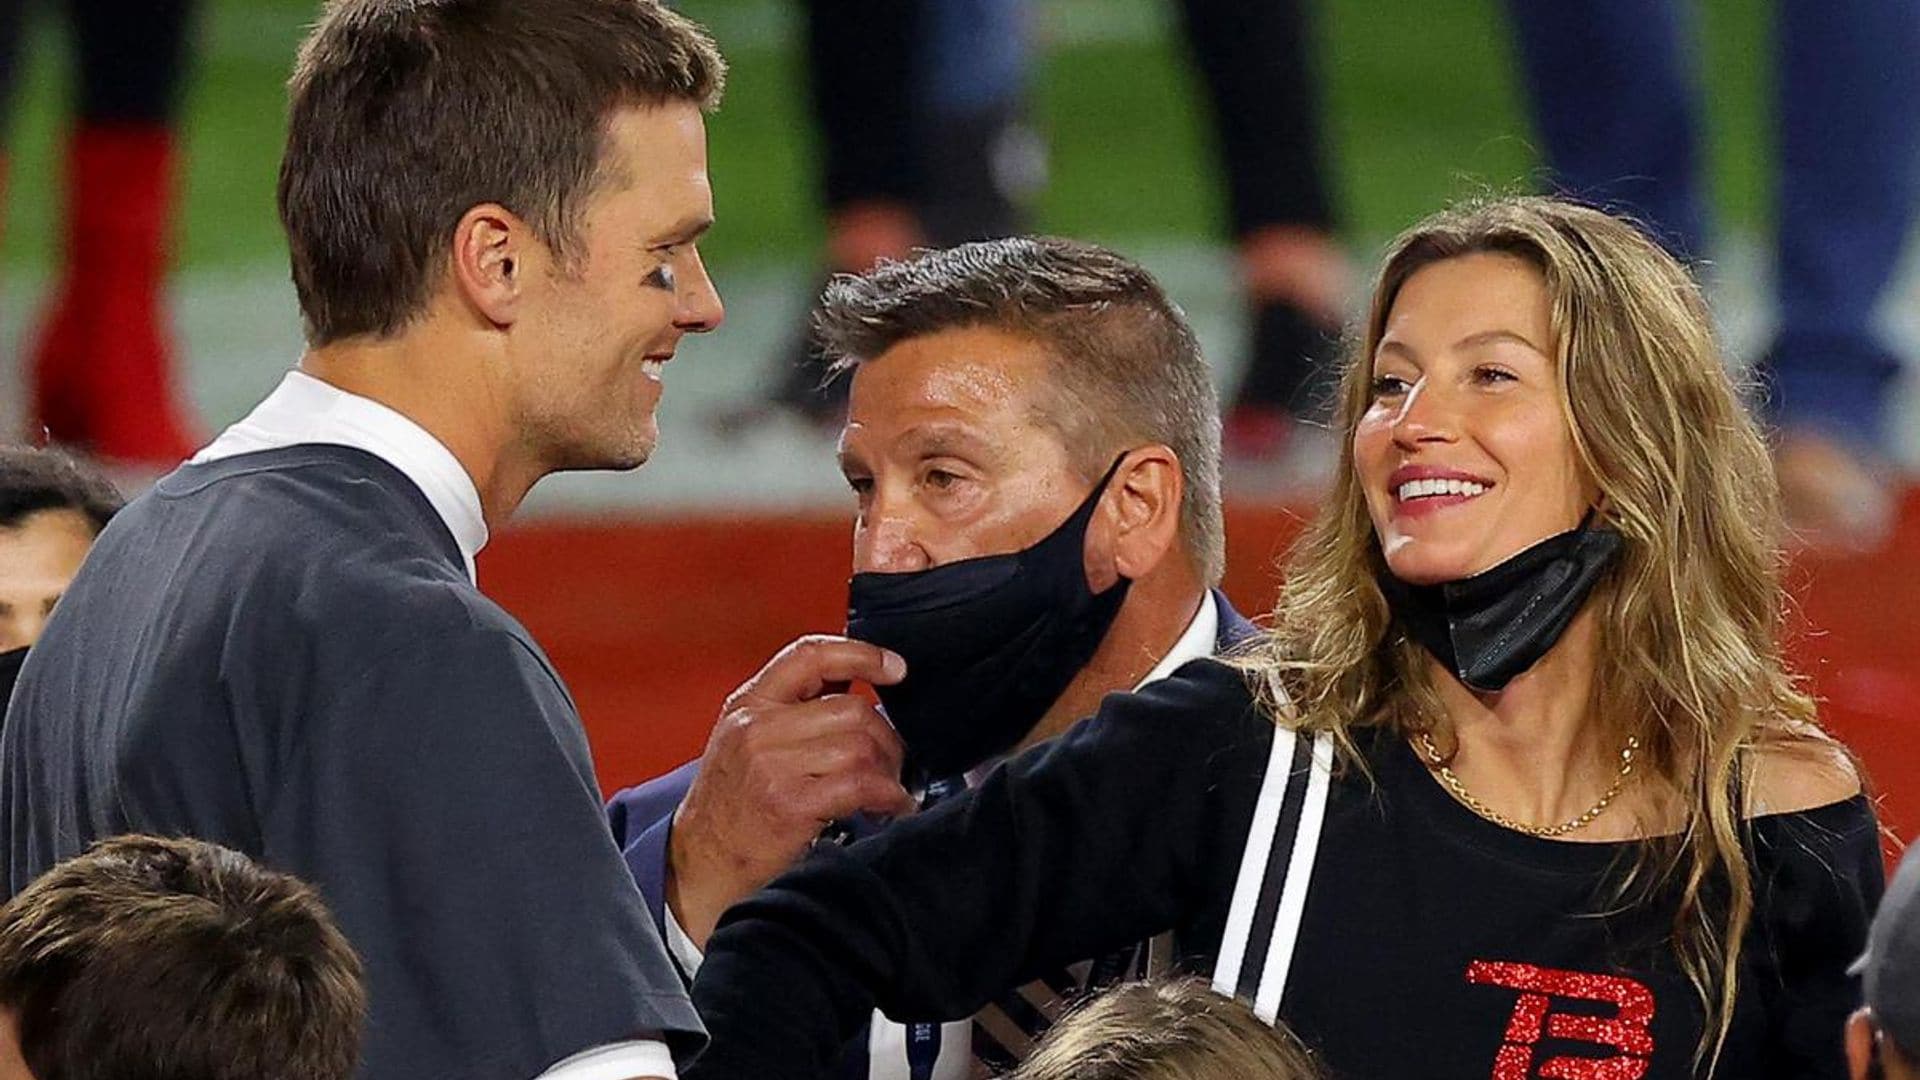 Tom Brady and Gisele Bündchen are clashing over his choice to un-retire